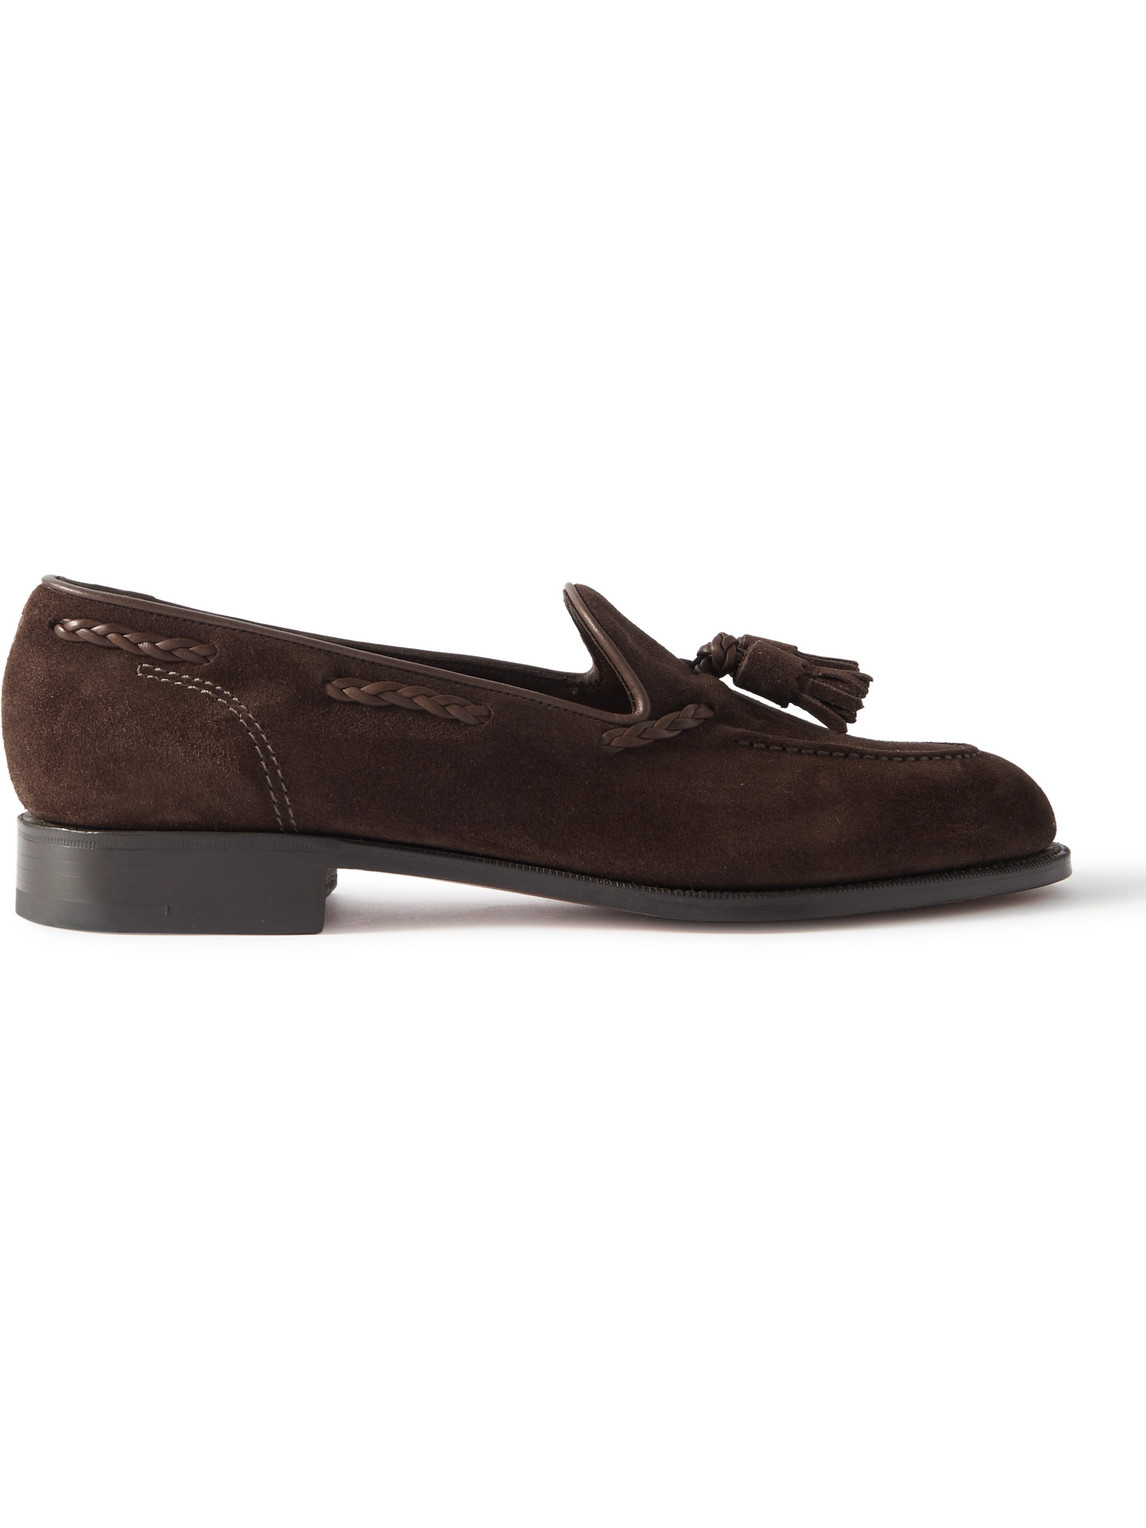 EDWARD GREEN BELGRAVIA LEATHER-TRIMMED SUEDE TASSELLED LOAFERS